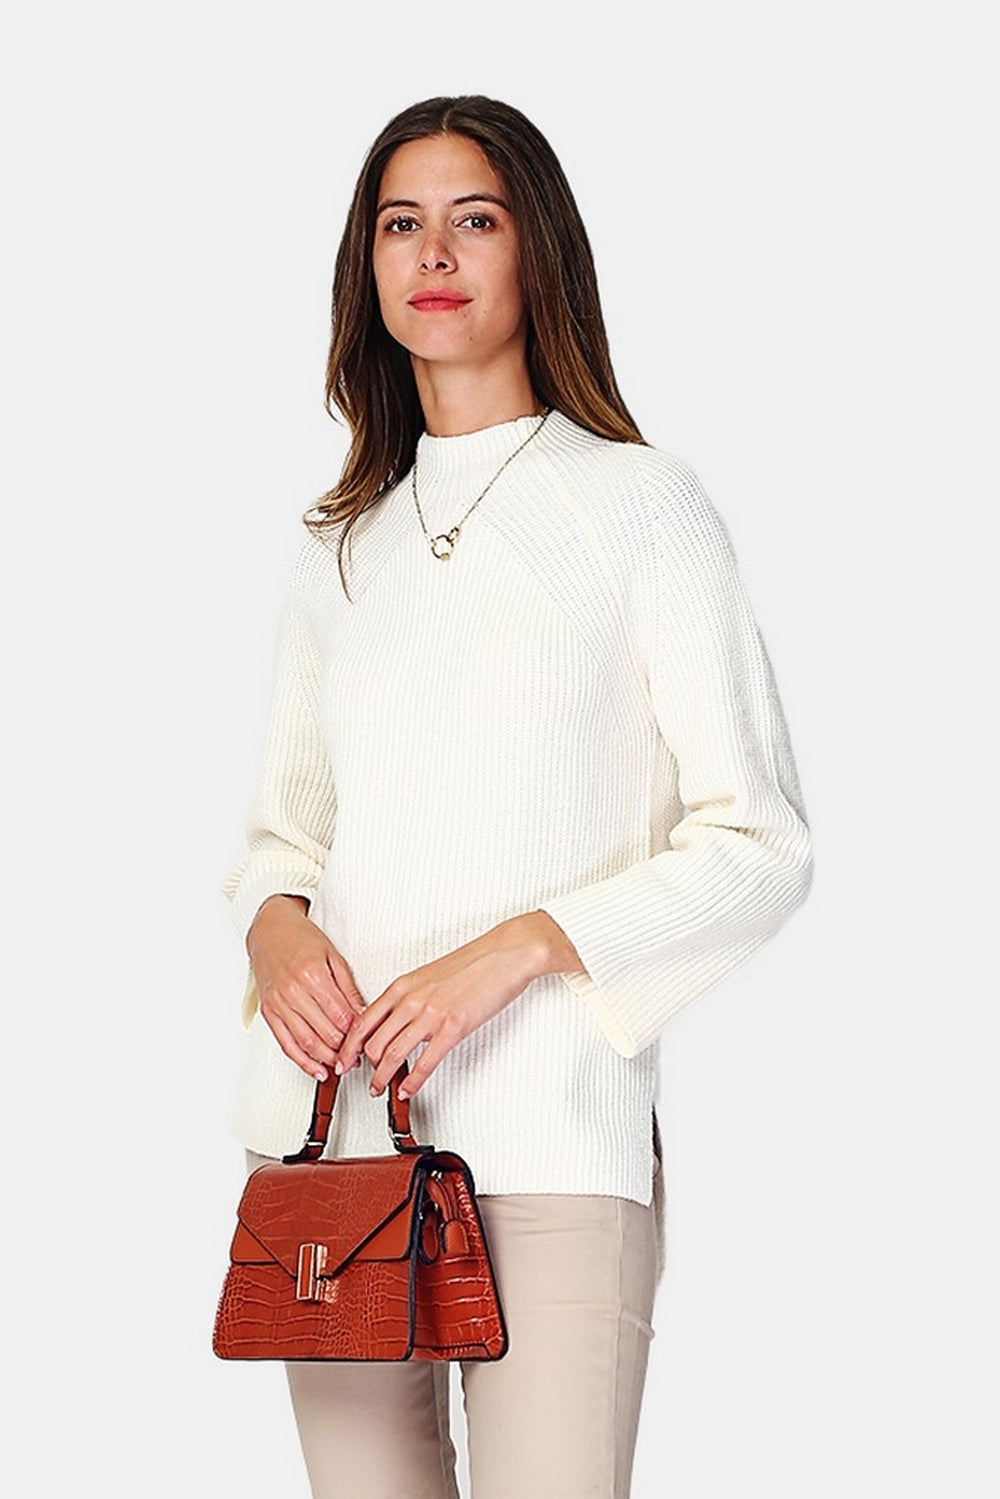 Fancy knit crewneck sweater with long sleeves